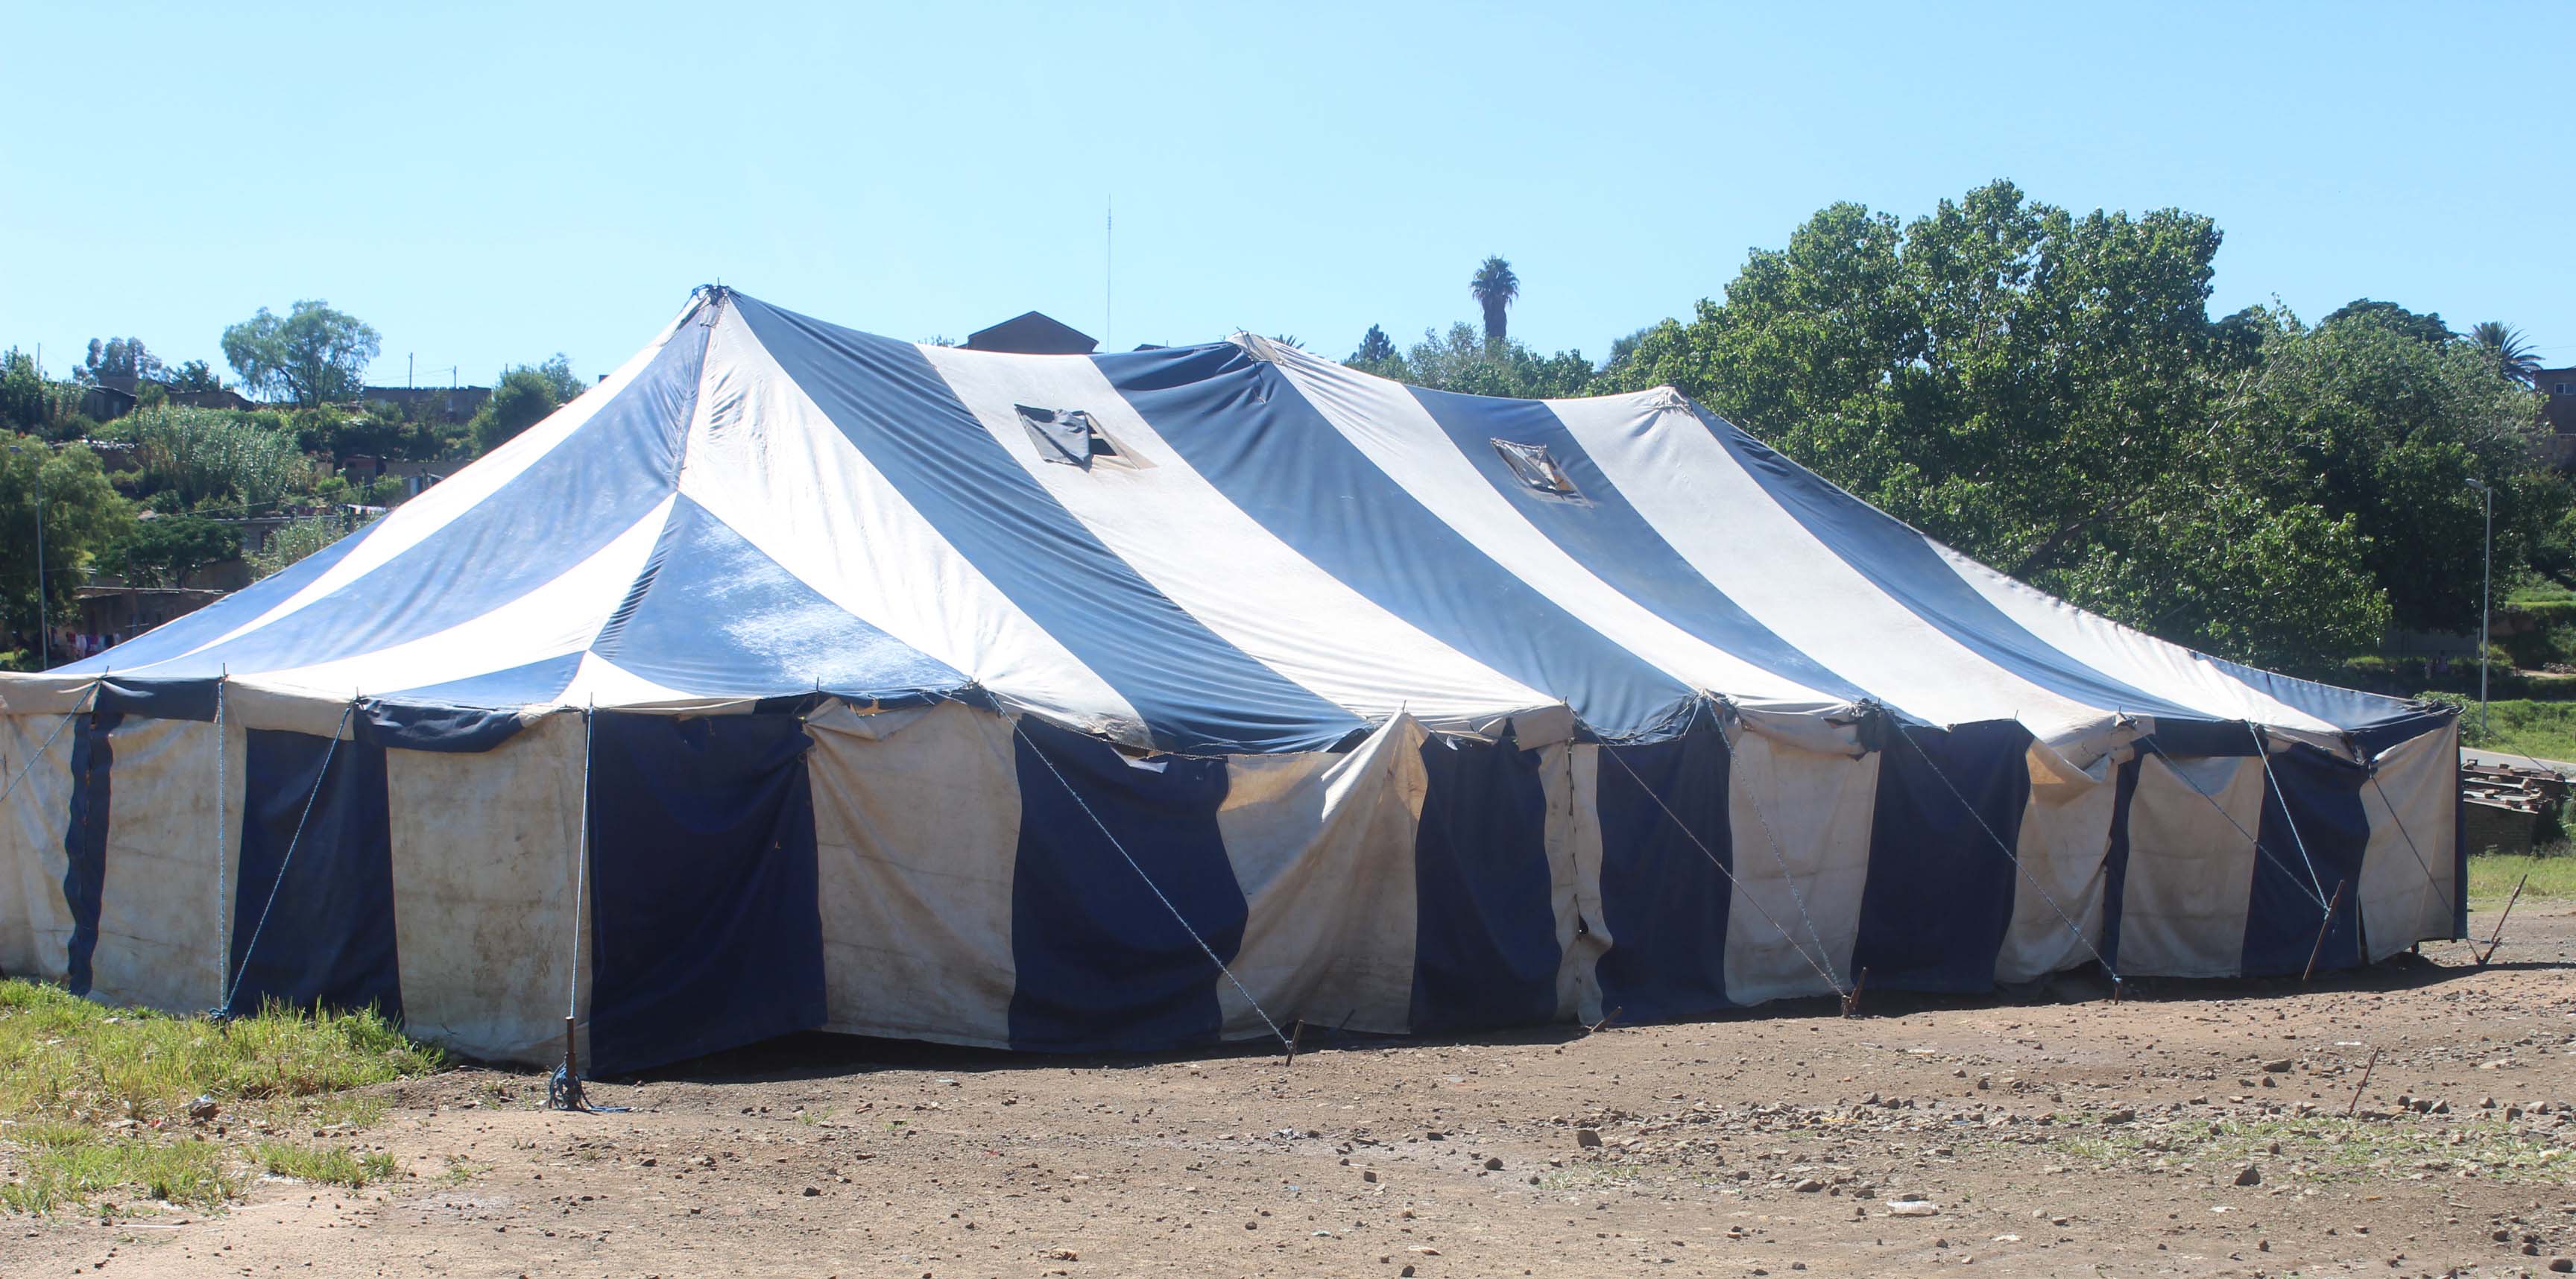 Jehovah Jire Ministries is operating in a tent located in Lower Thamae, near New Millennium English Medium School.